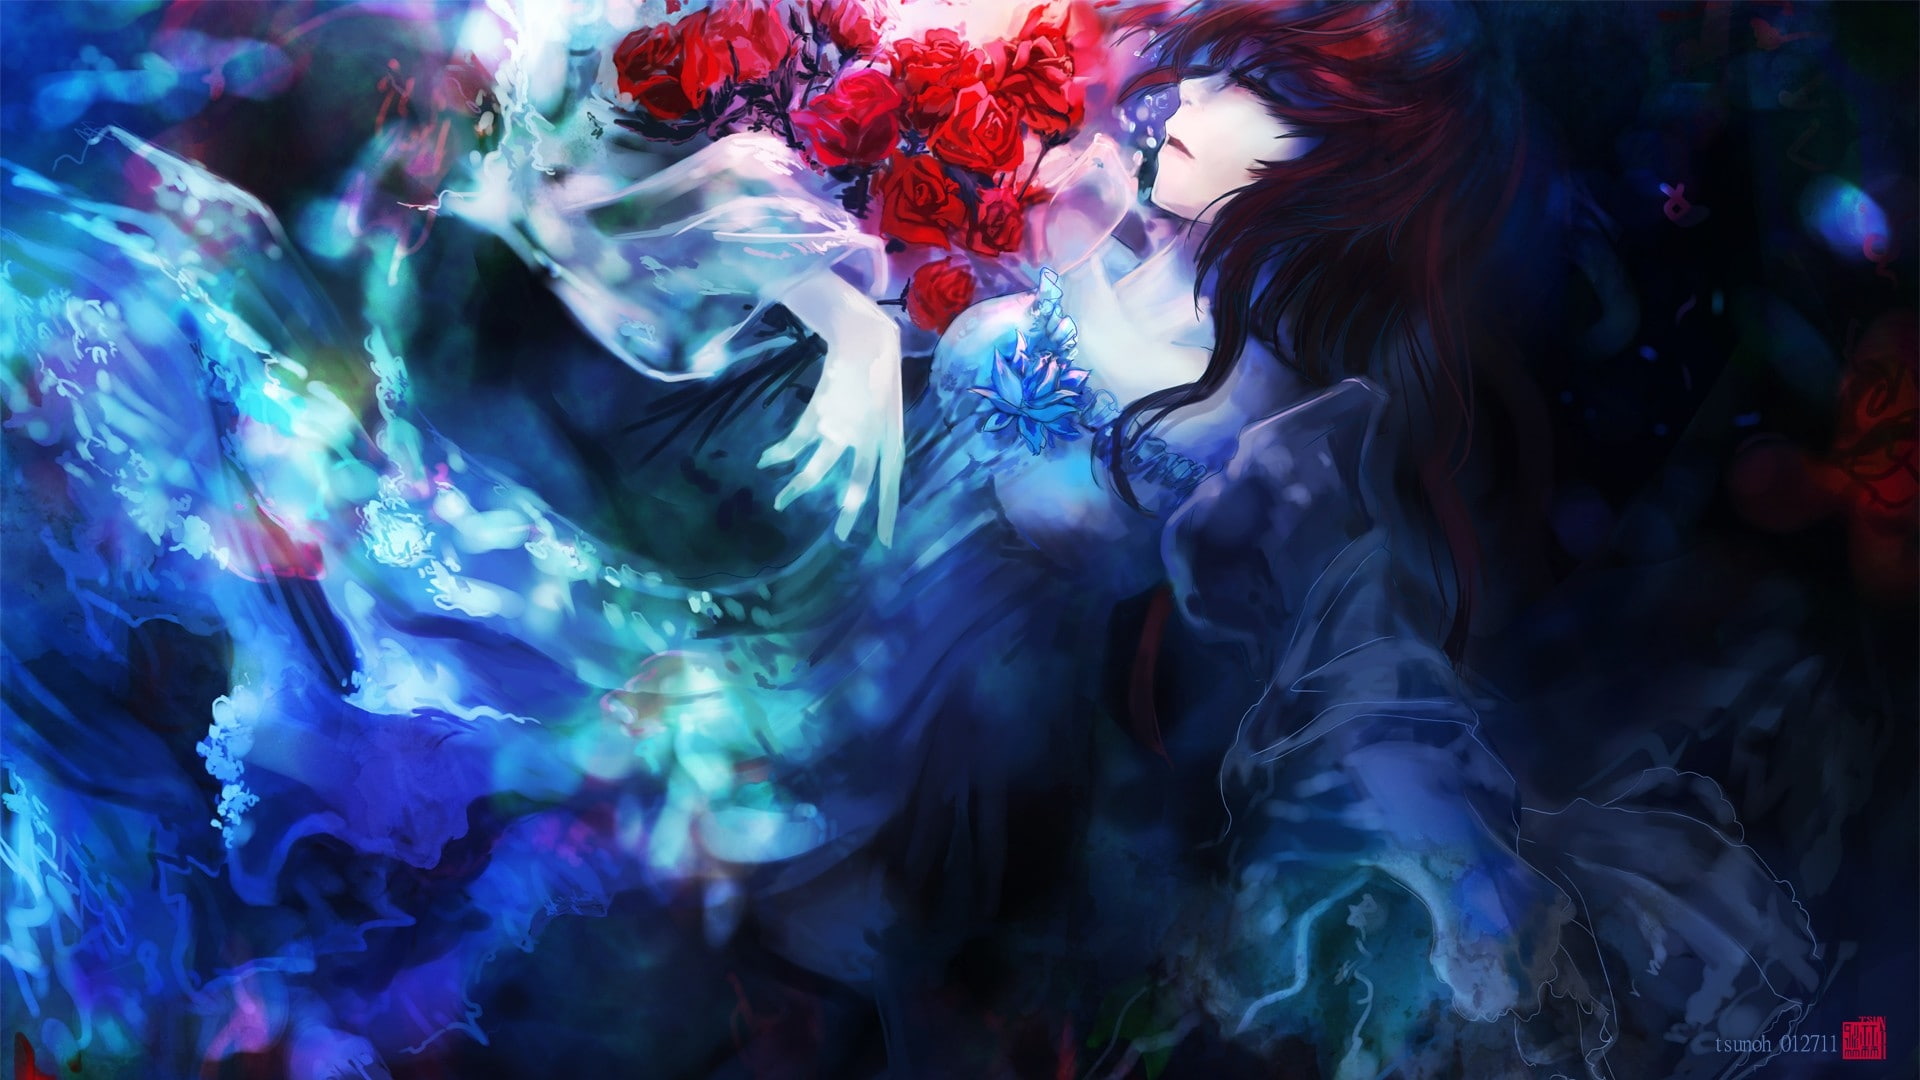 dress colorful flowers gothic sleeping artwork drawings anime roses anime girls 1920x1080 wallpap Nature Flowers HD Art